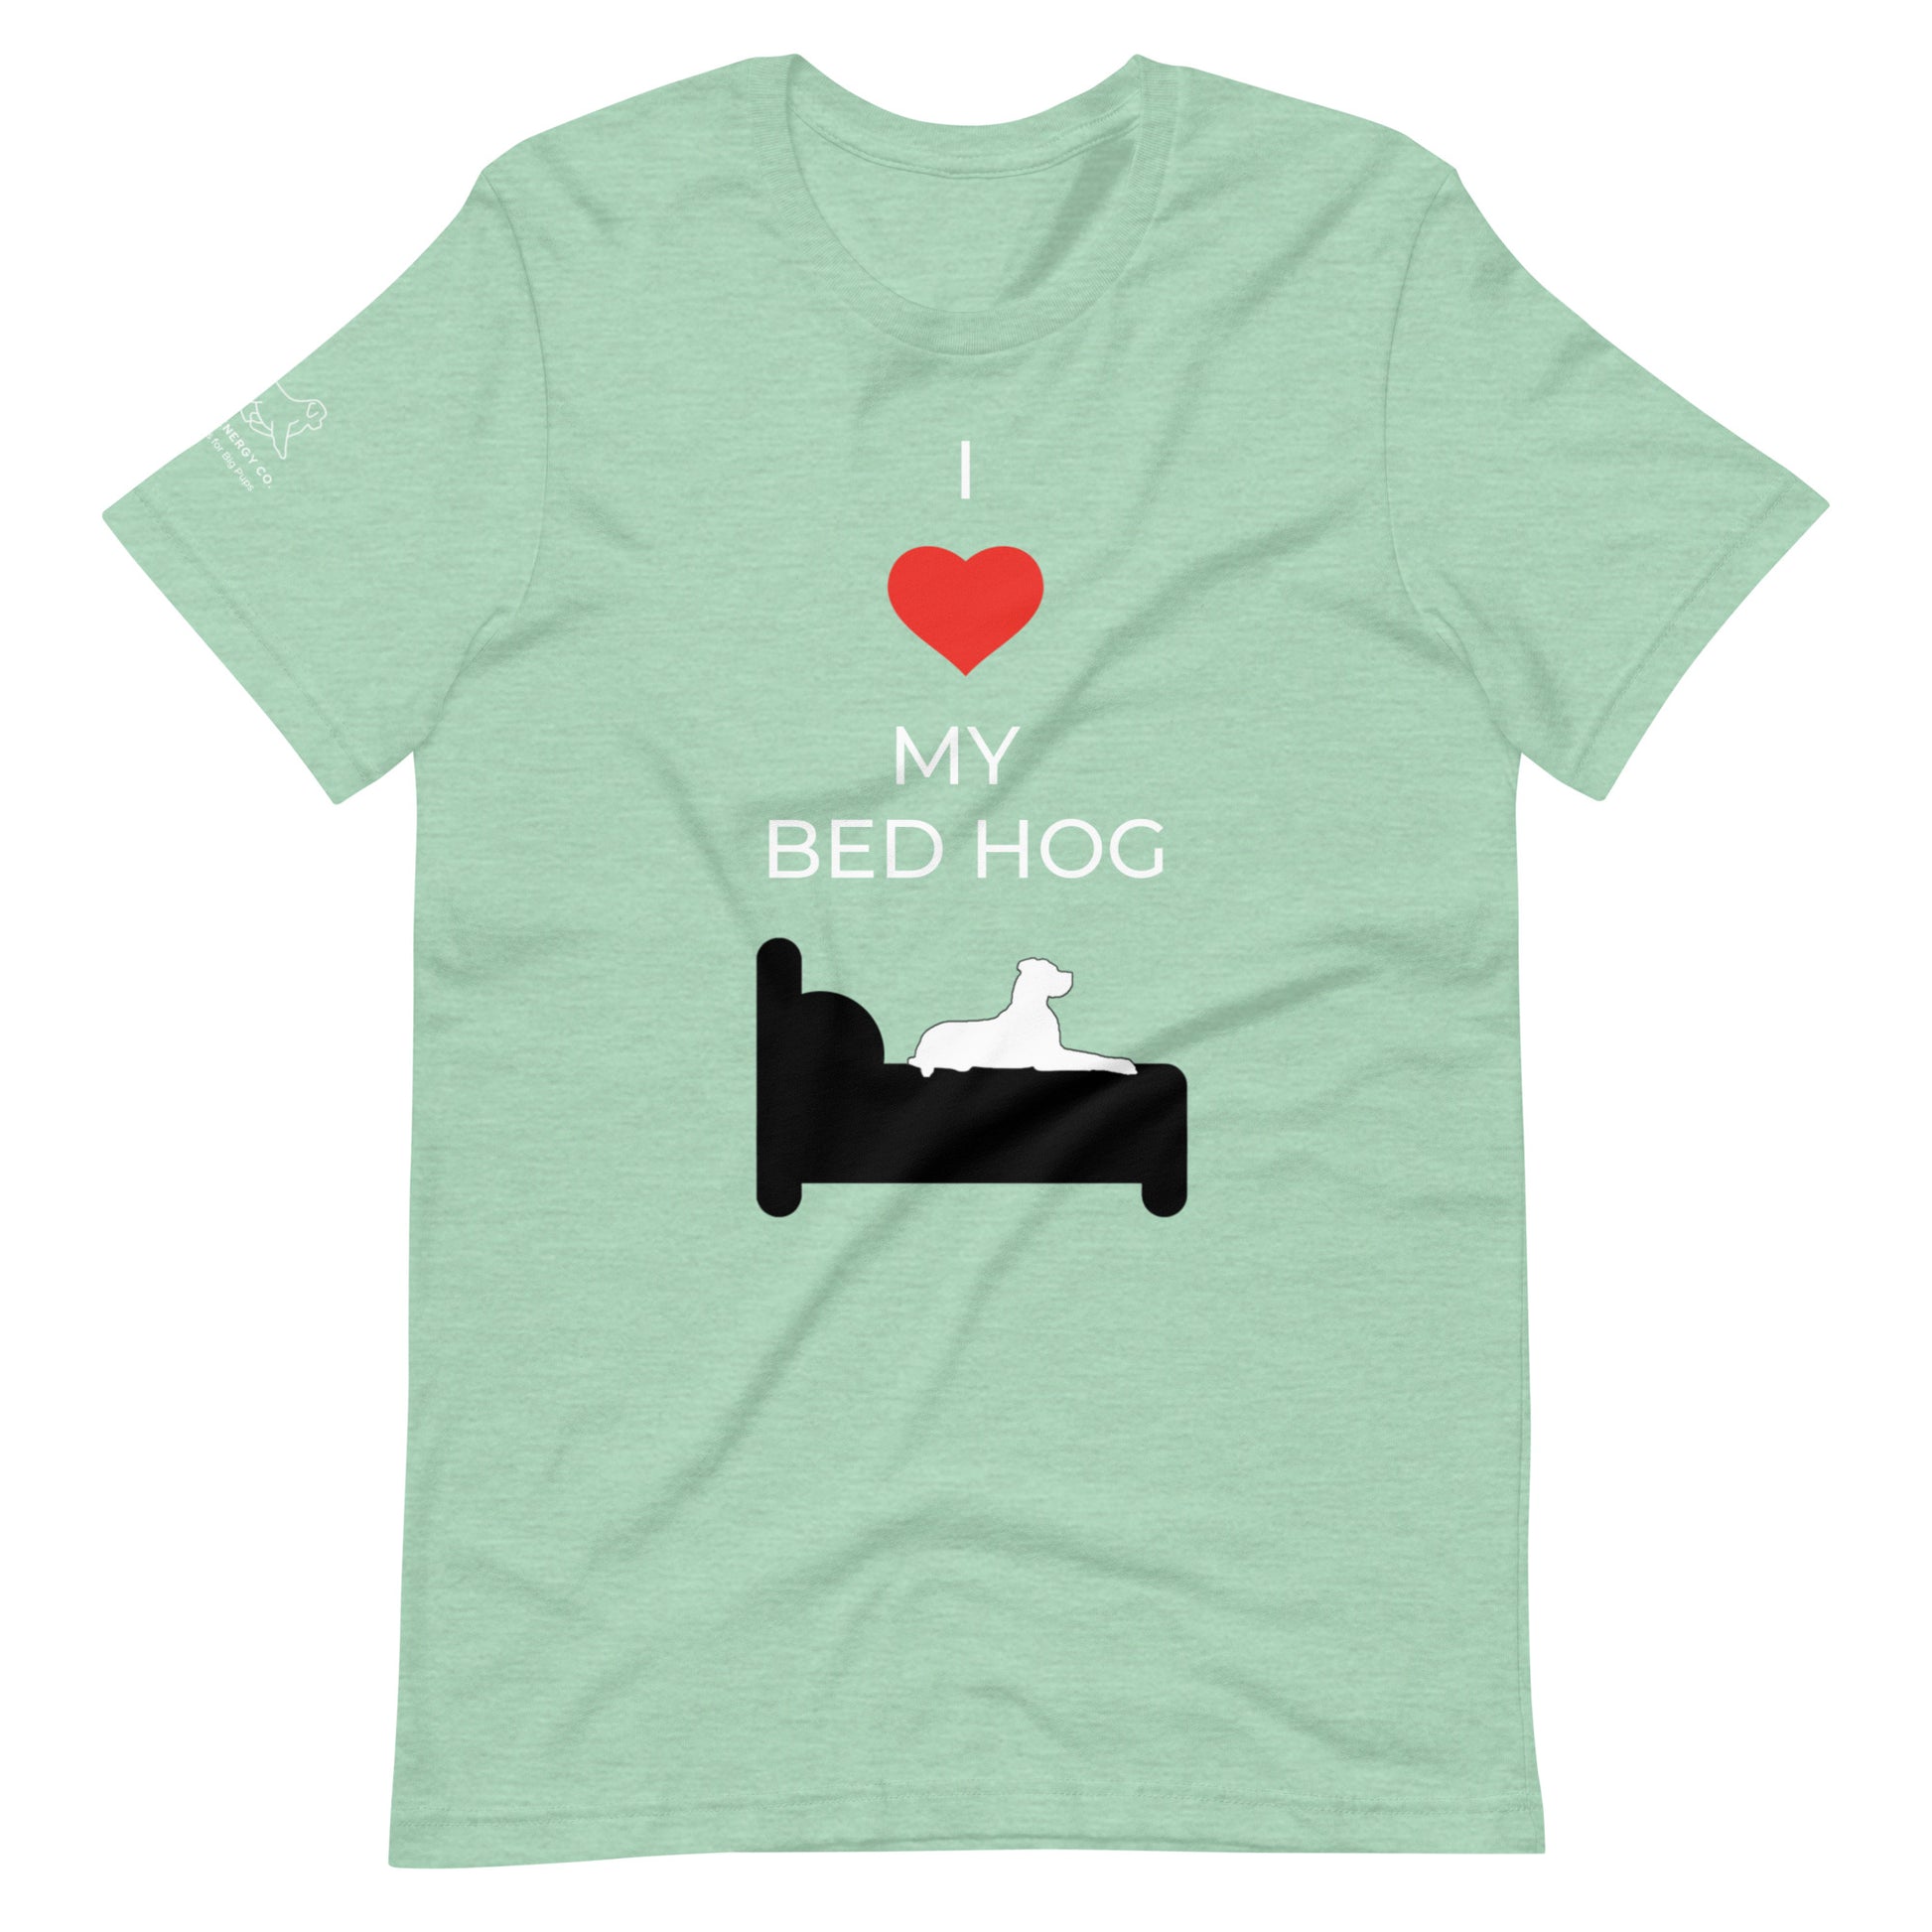 Front of a mint green t-shirt that reads "I love my bed hog" in white text over an illustration that is the white silhouette of a large dog laying on the dark silhouette of a bed. The word "love" is replaced by a red heart symbol.